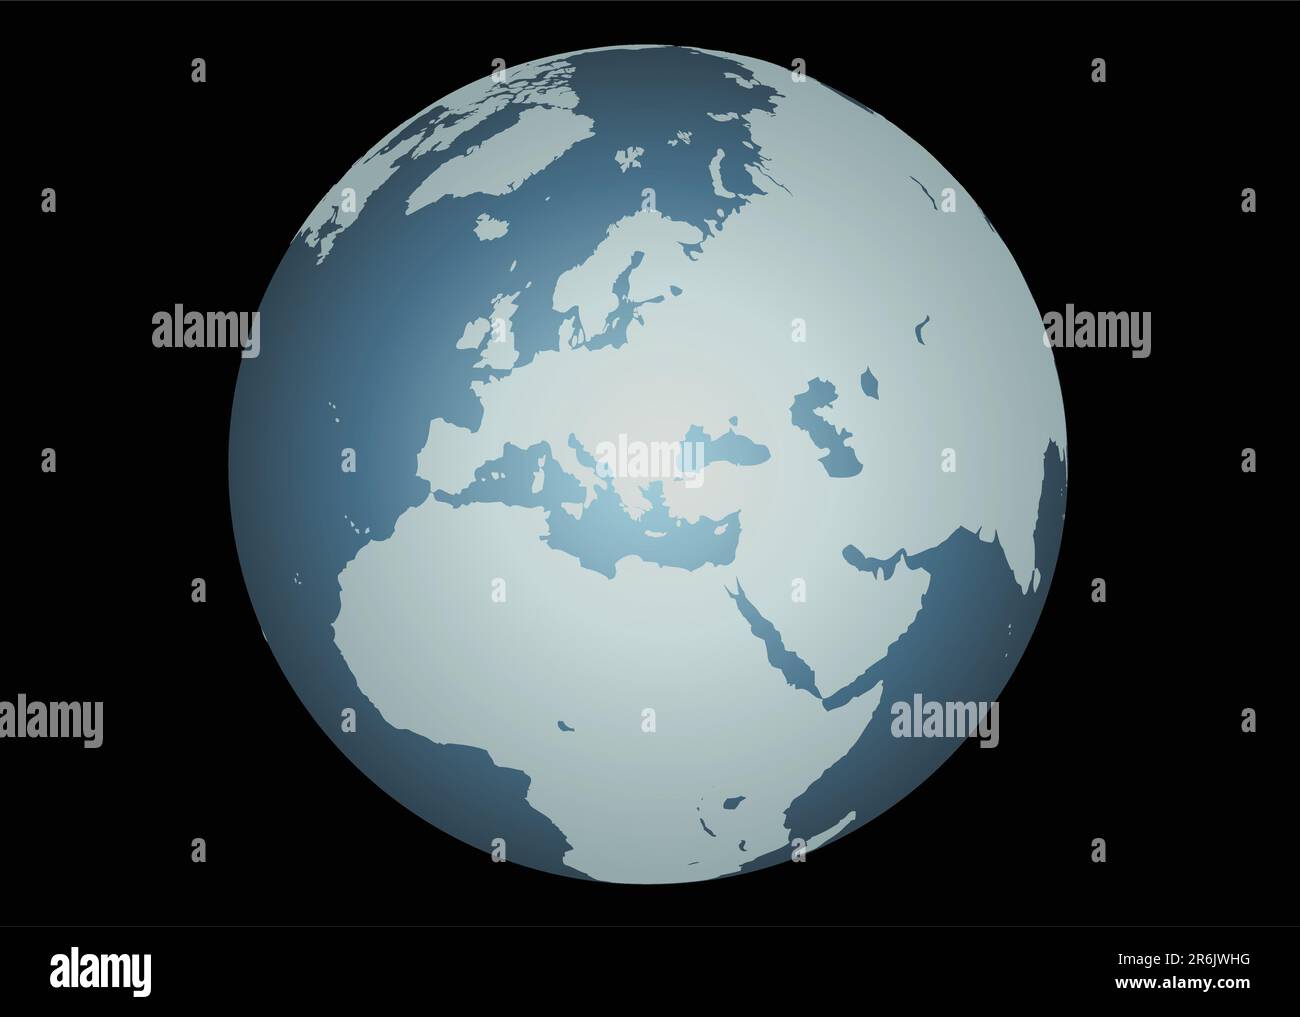 Europe (Vector). Accurate map of Europe. Mapped onto a globe. Includes small islands. Stock Vector